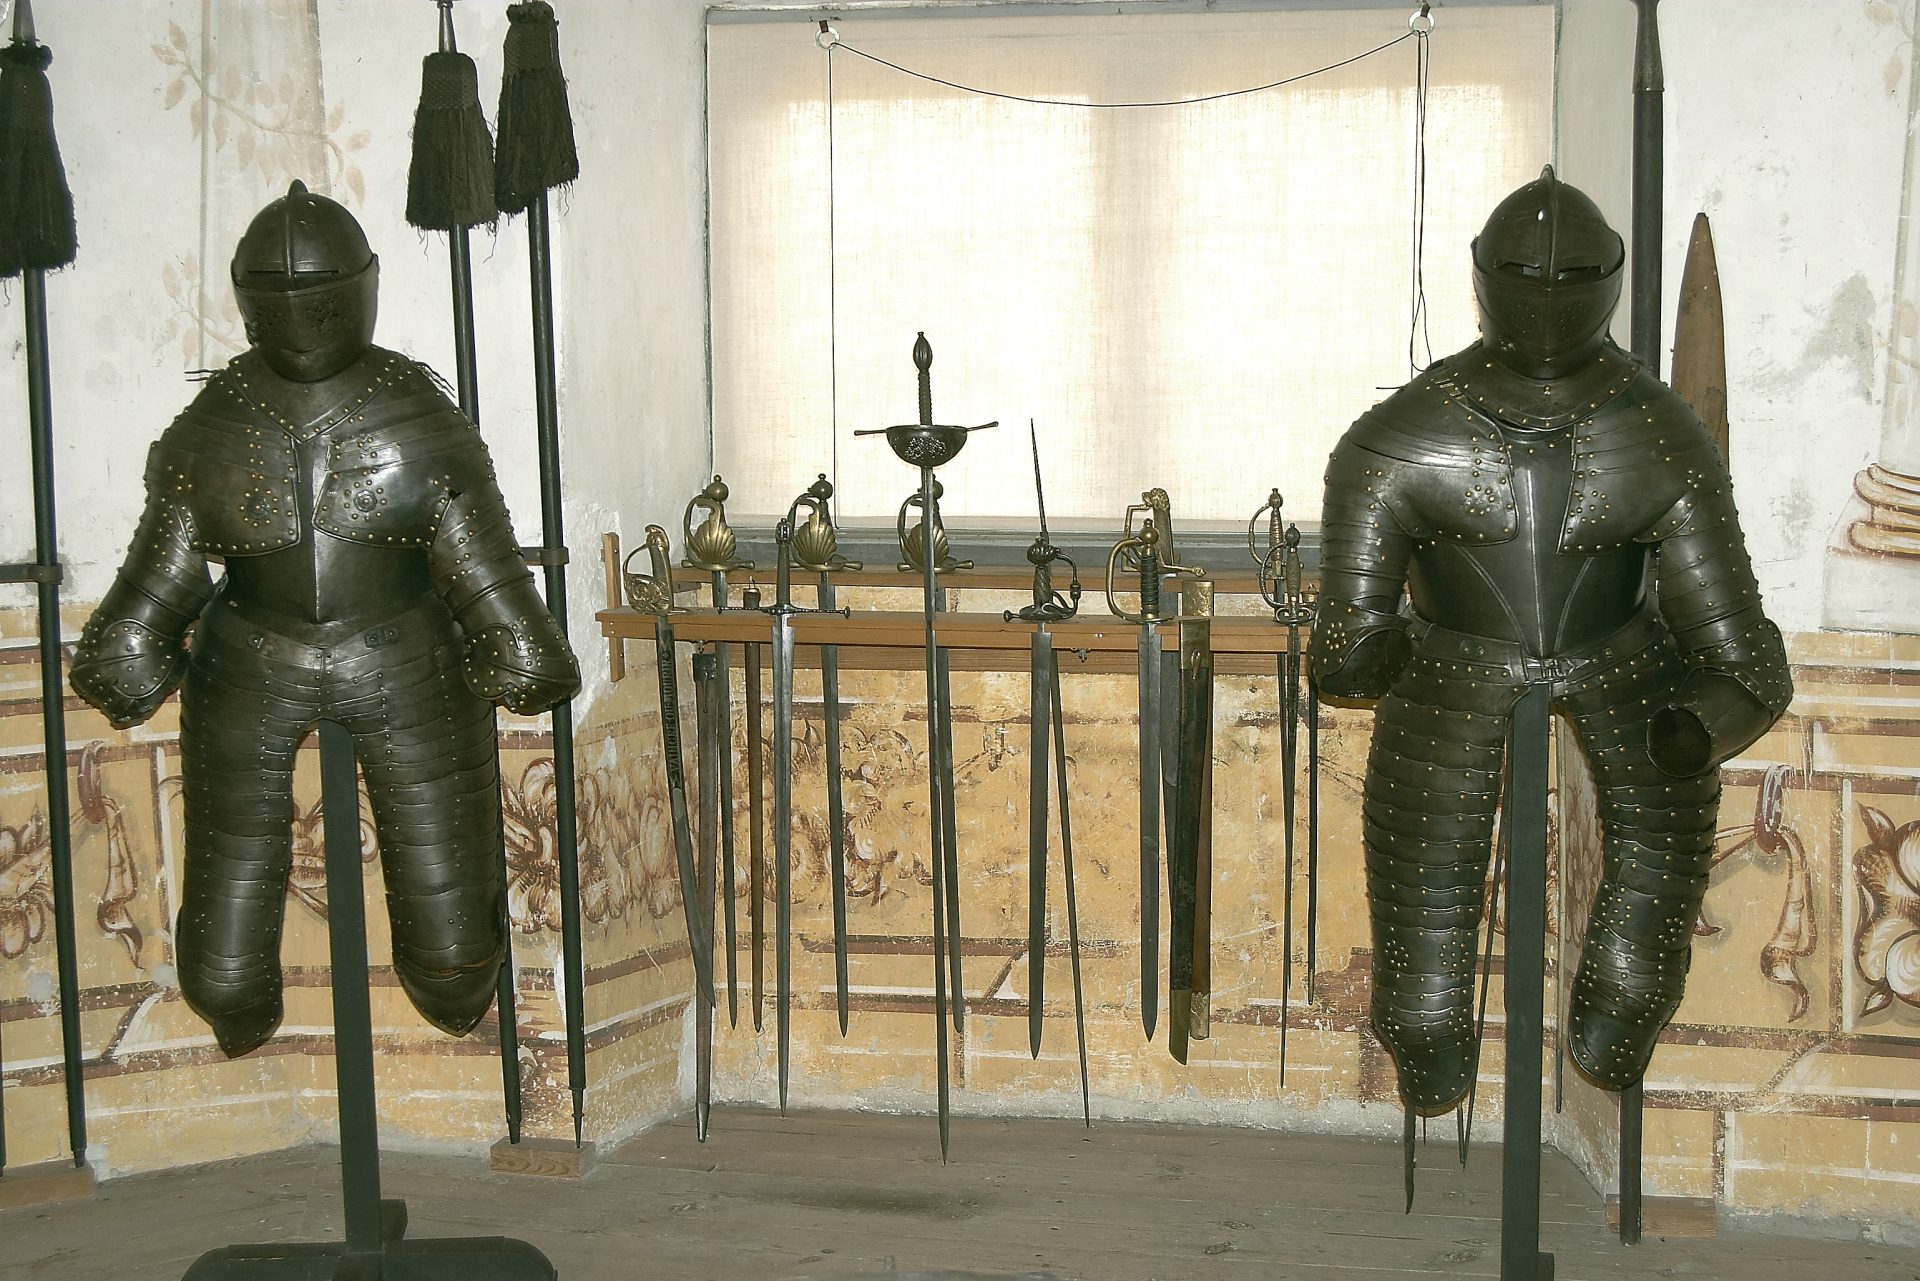 Two siuts of armour and some swords against a painted wall.